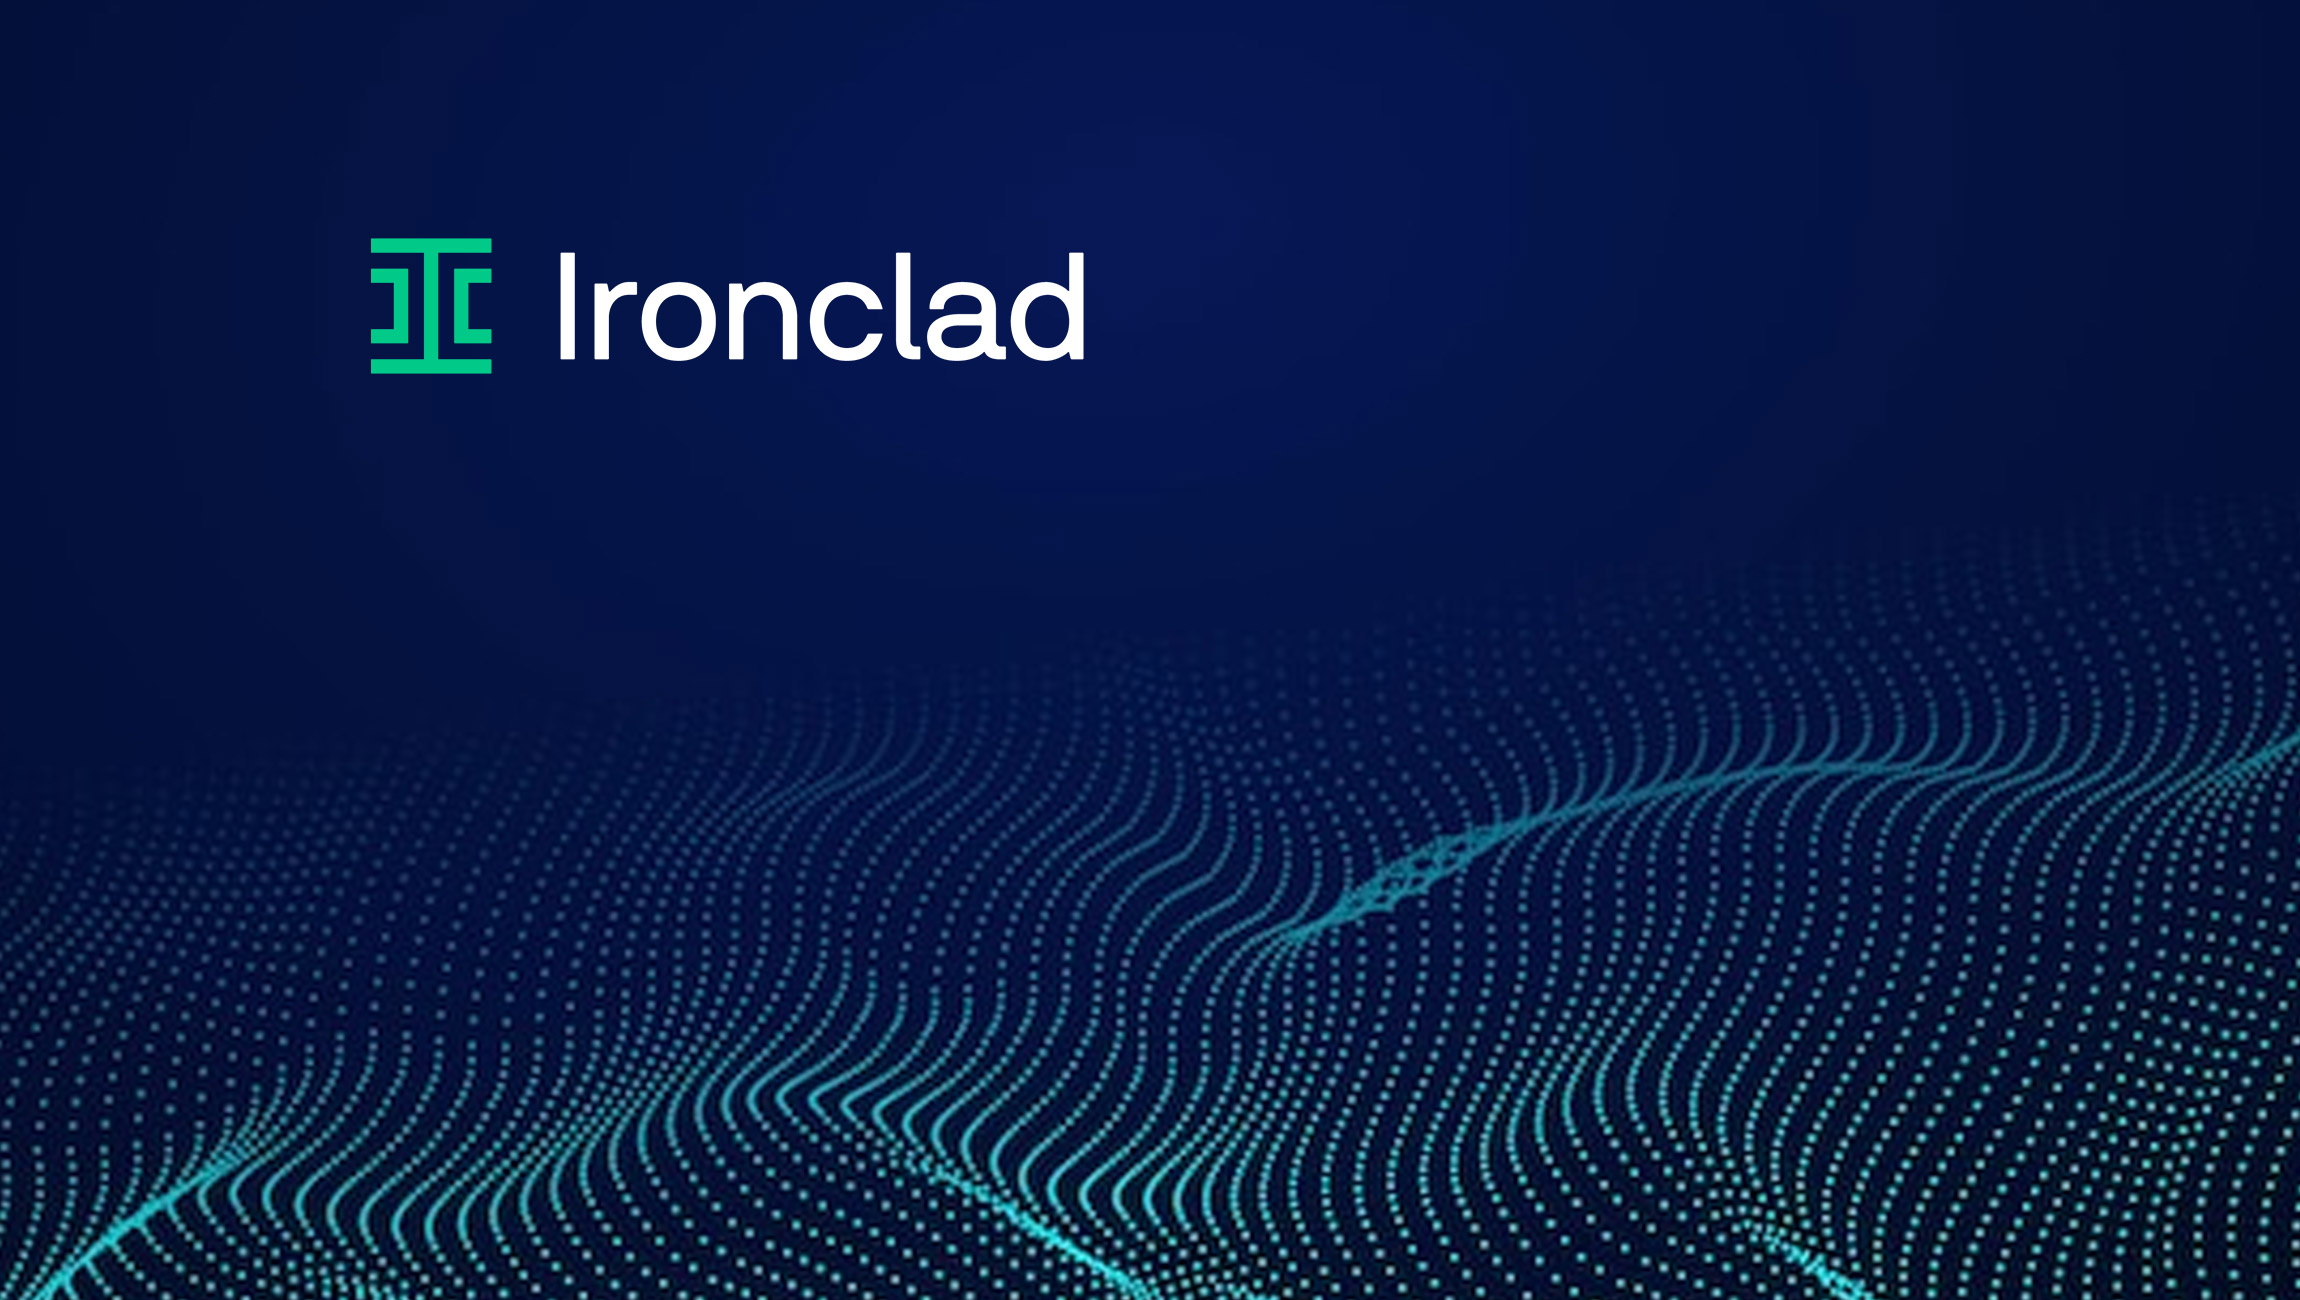 First-of-its-Kind Report from Ironclad Explores Trends in Collaboration, Hiring